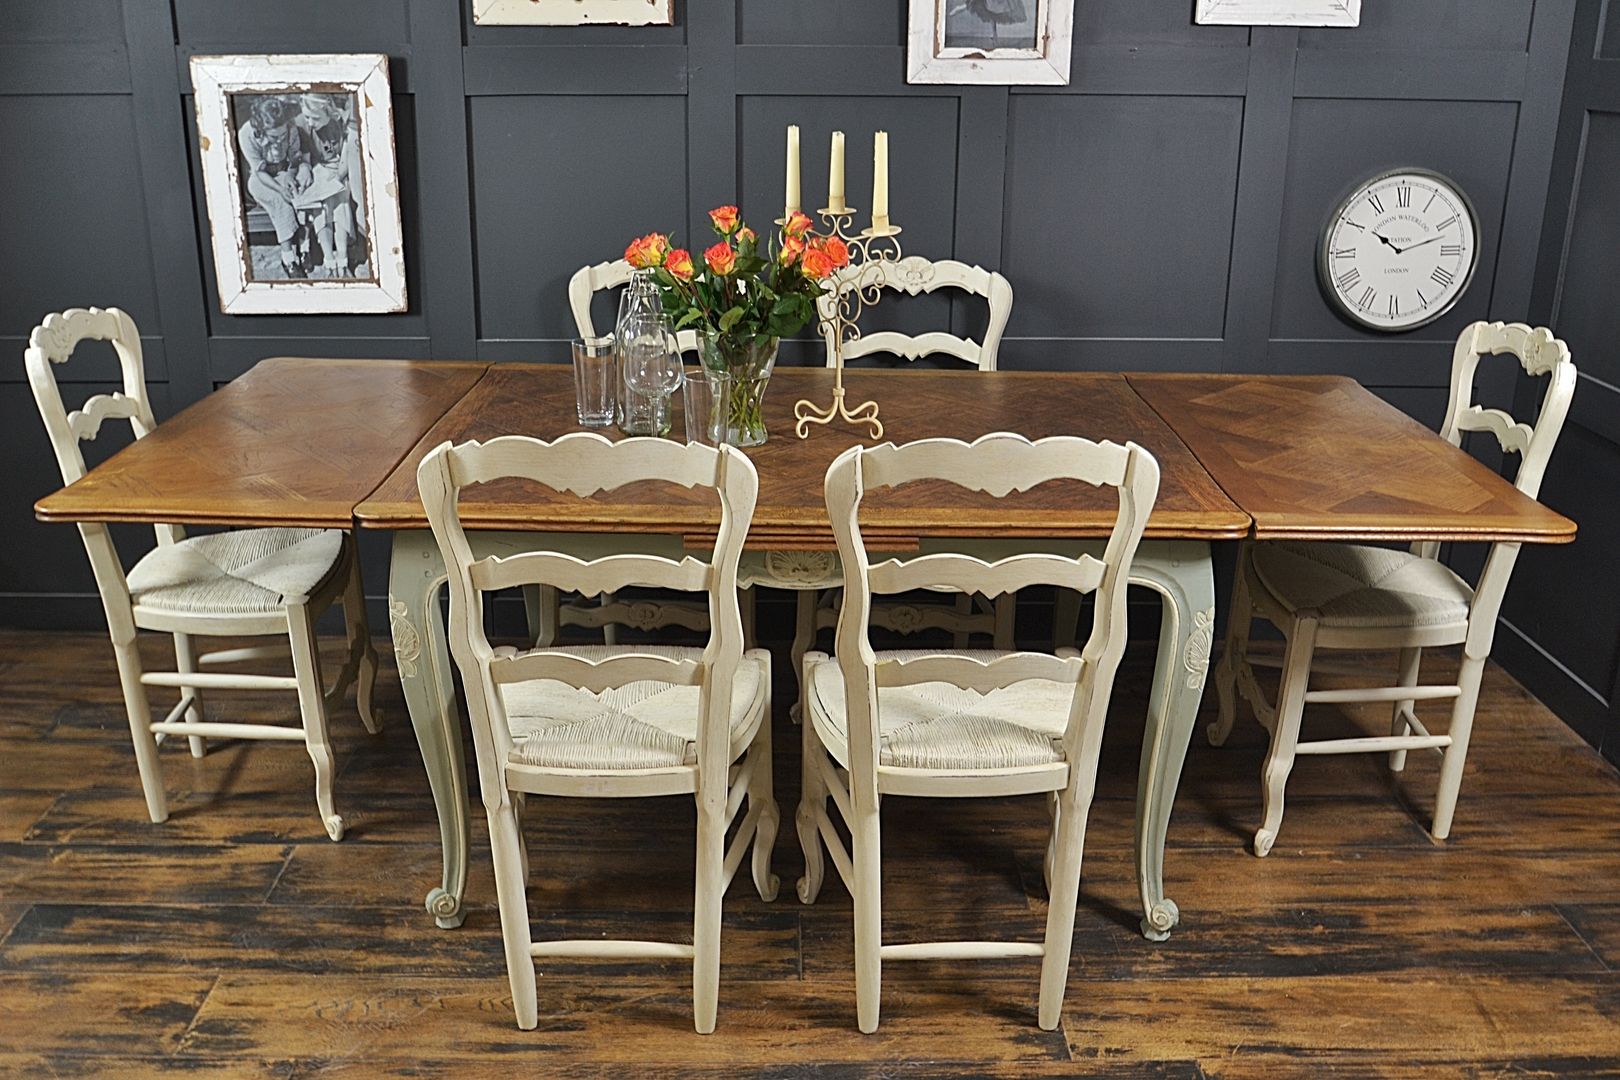 Shabby Chic French Oak Dining Table with 6 Chairs in Rococo, The Treasure Trove Shabby Chic & Vintage Furniture The Treasure Trove Shabby Chic & Vintage Furniture Klasyczna jadalnia Stoły